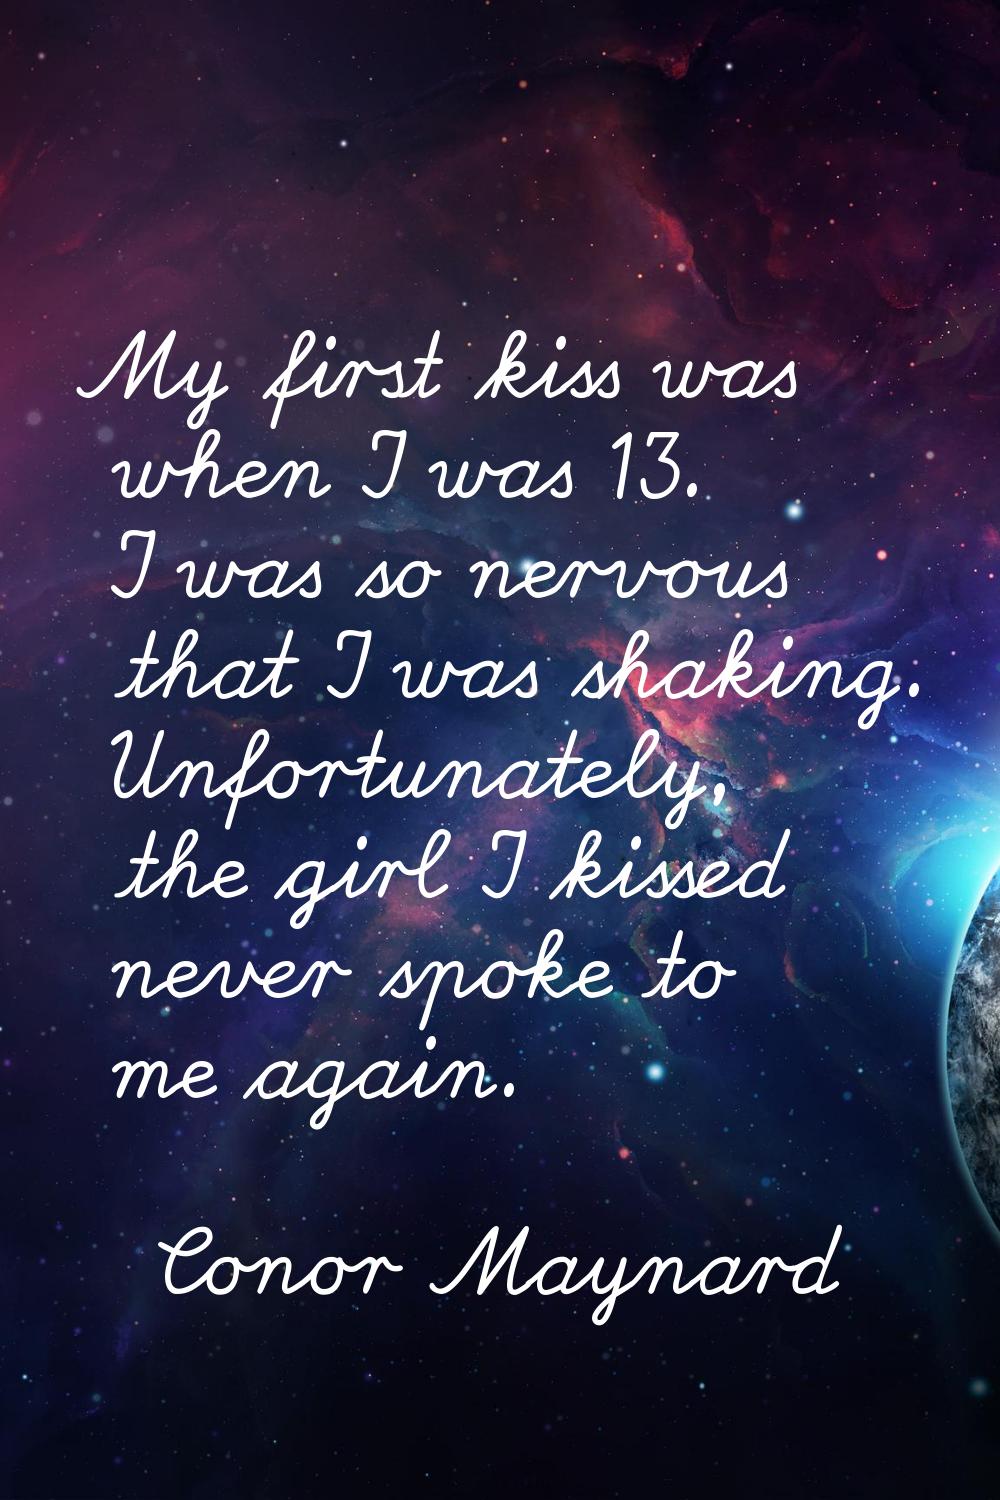 My first kiss was when I was 13. I was so nervous that I was shaking. Unfortunately, the girl I kis